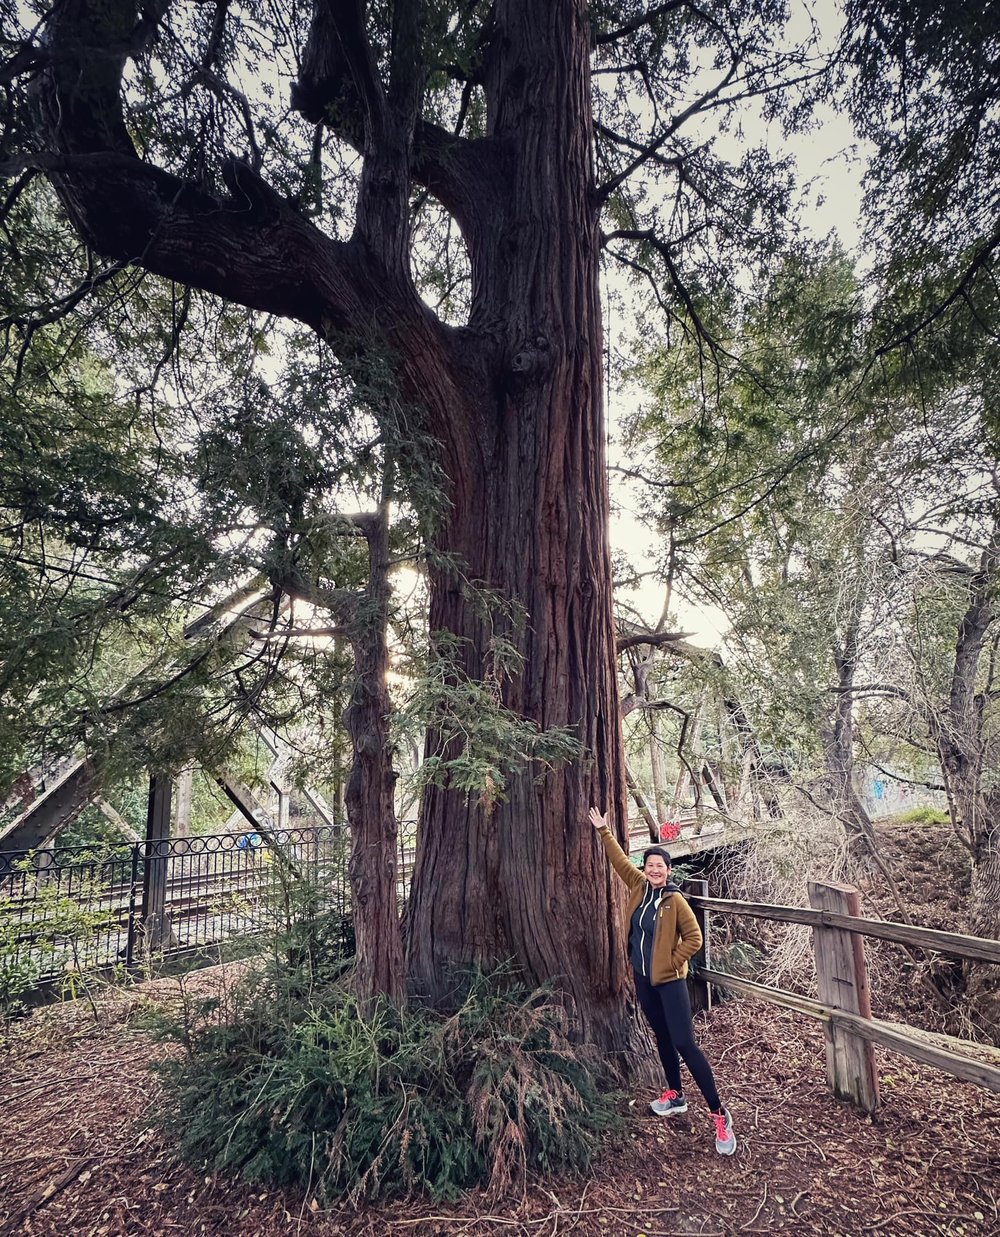  I love trees. This notable coastal redwood, El Palo Alto, is more than a thousand years old, sheltered the European Portola Expedition in the 1700s, gave Palo Alto its name, and Stanford University its mascot. The community has been protecting it fo